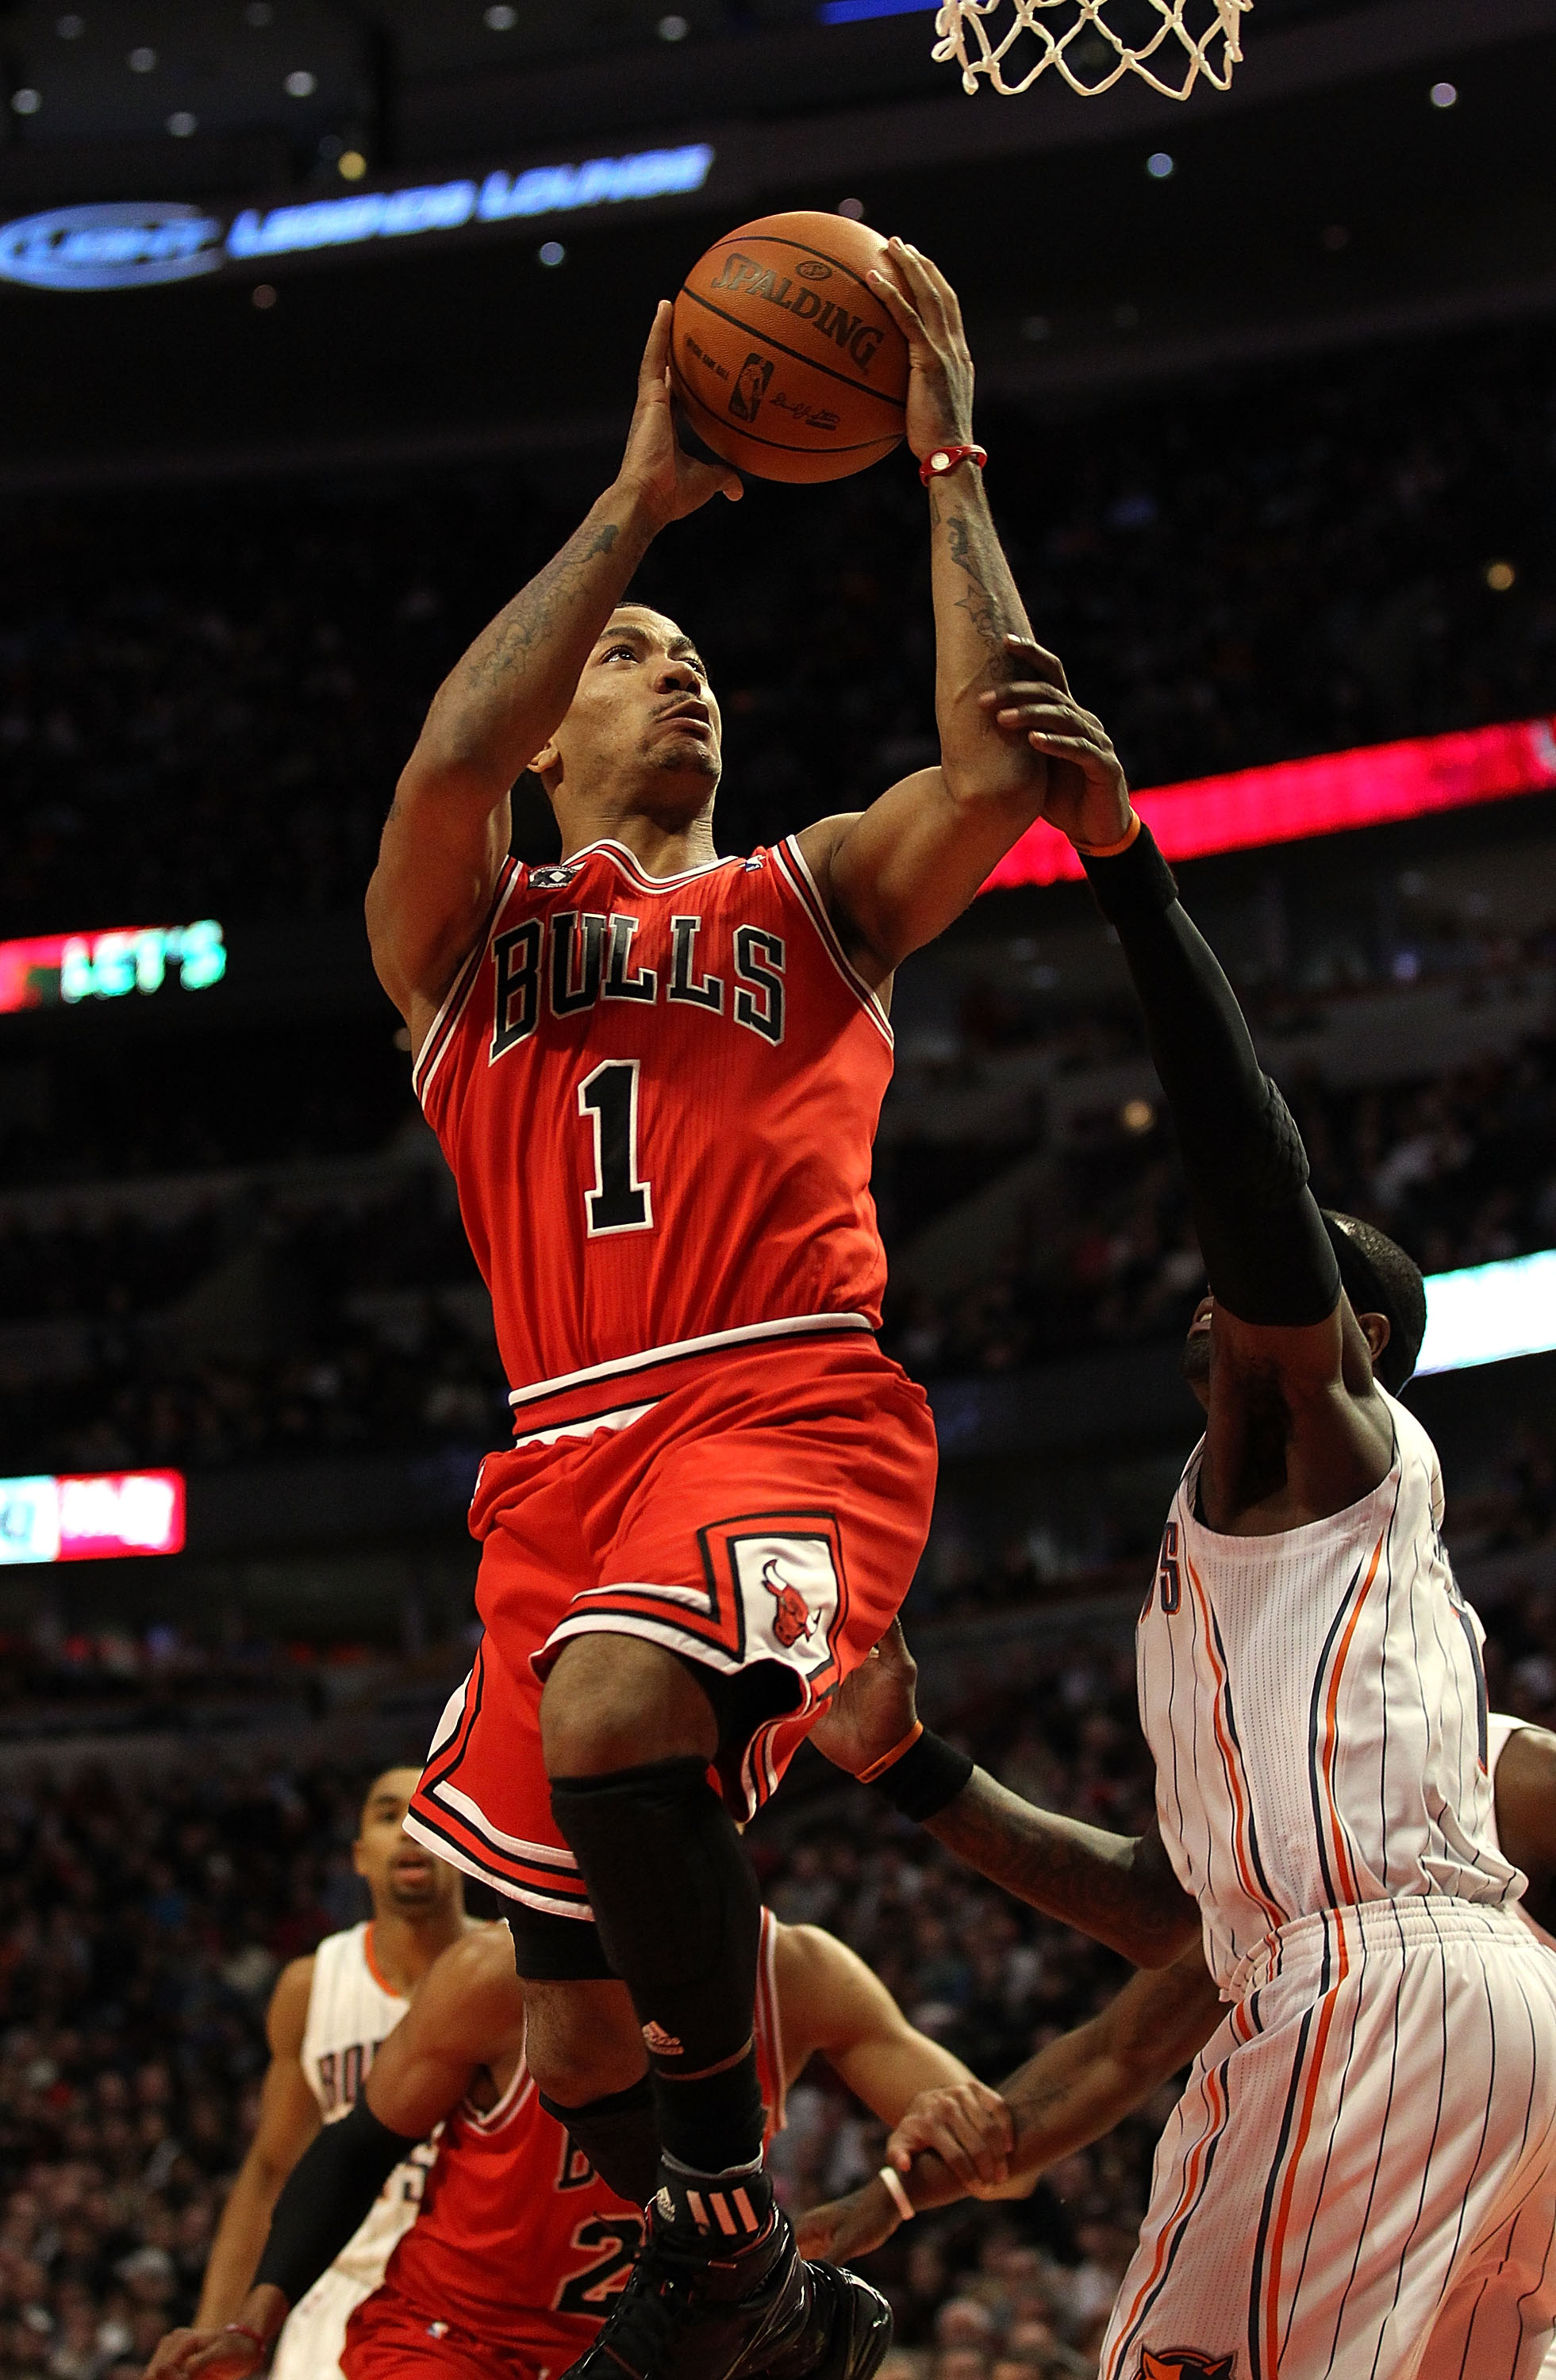 CHICAGO, IL - FEBRUARY 15: Derrick Rose #1 of the Chicago Bulls goes up to shoot past Stephen Jackson #1 of the Charlotte Bobcats at the United Center on February 15, 2011 in Chicago, Illinois. The Bulls defeated the Bobcats 106-94. NOTE TO USER: User exp